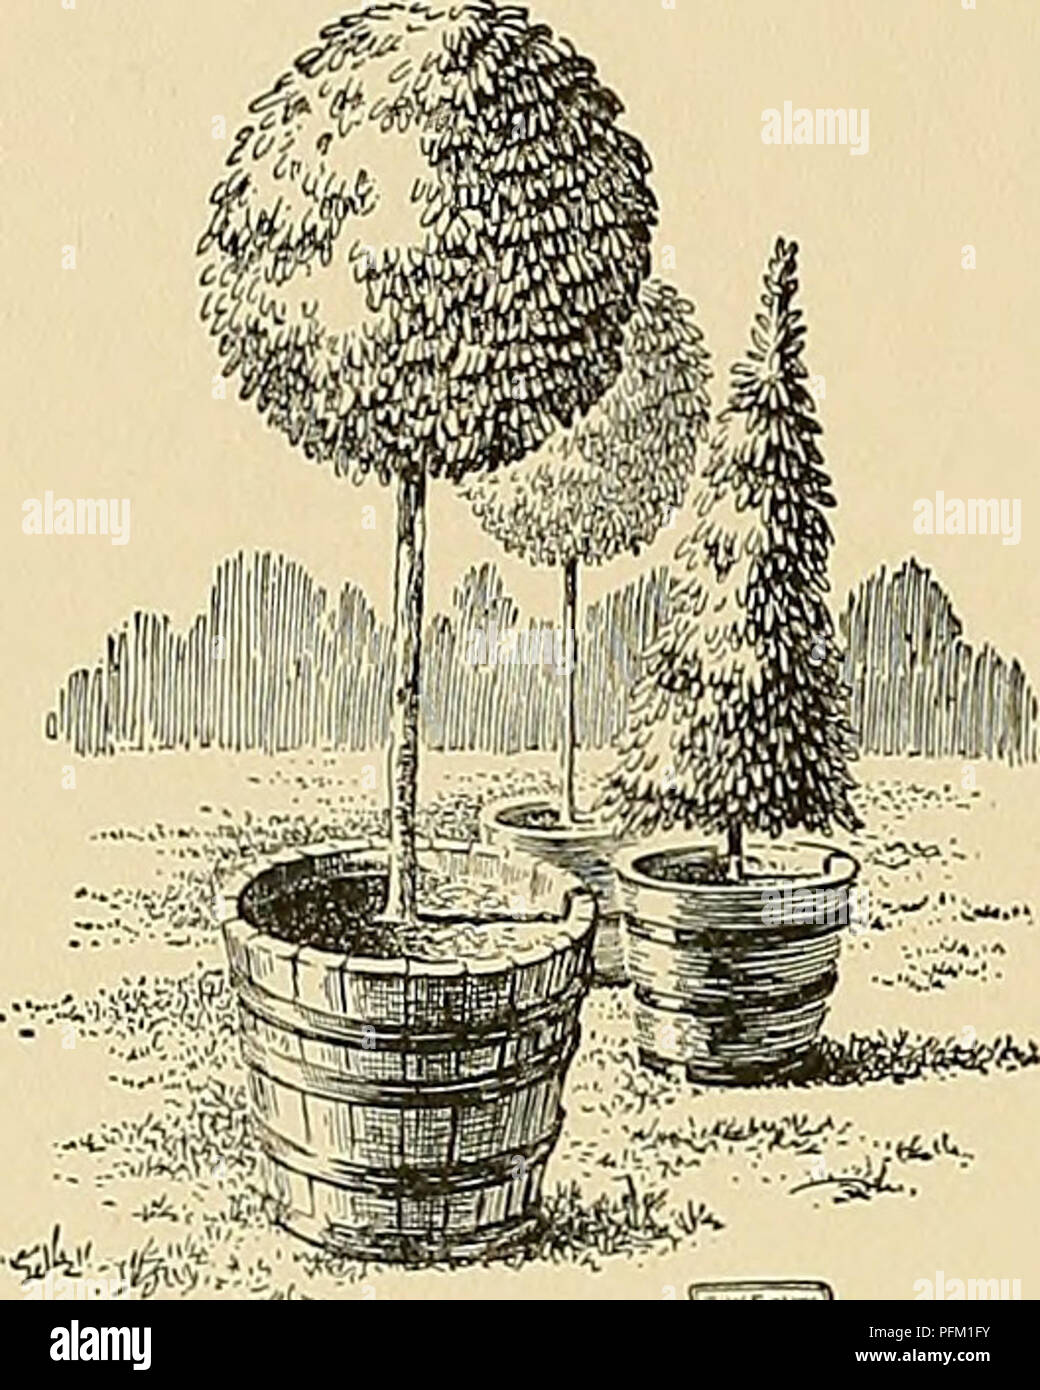 . Cyclopedia of American horticulture, comprising suggestions for cultivation of horticultural plants, descriptions of the species of fruits, vegetables, flowers, and ornamental plants sold in the United States and Canada, together with geographical and biographical sketches. Gardening. 890 LAURUS LAVANDULA ferred to Laurus, but witt the exception of two, these species are now placed in other genera. These two true Lauruses are L. nobilis, Linn, (the subject of this slietch), and i. Canariensis, Webb &amp; Berth., of the Canary Islands. The fls. are dicecious or perfect, small and inconspicuou Stock Photo